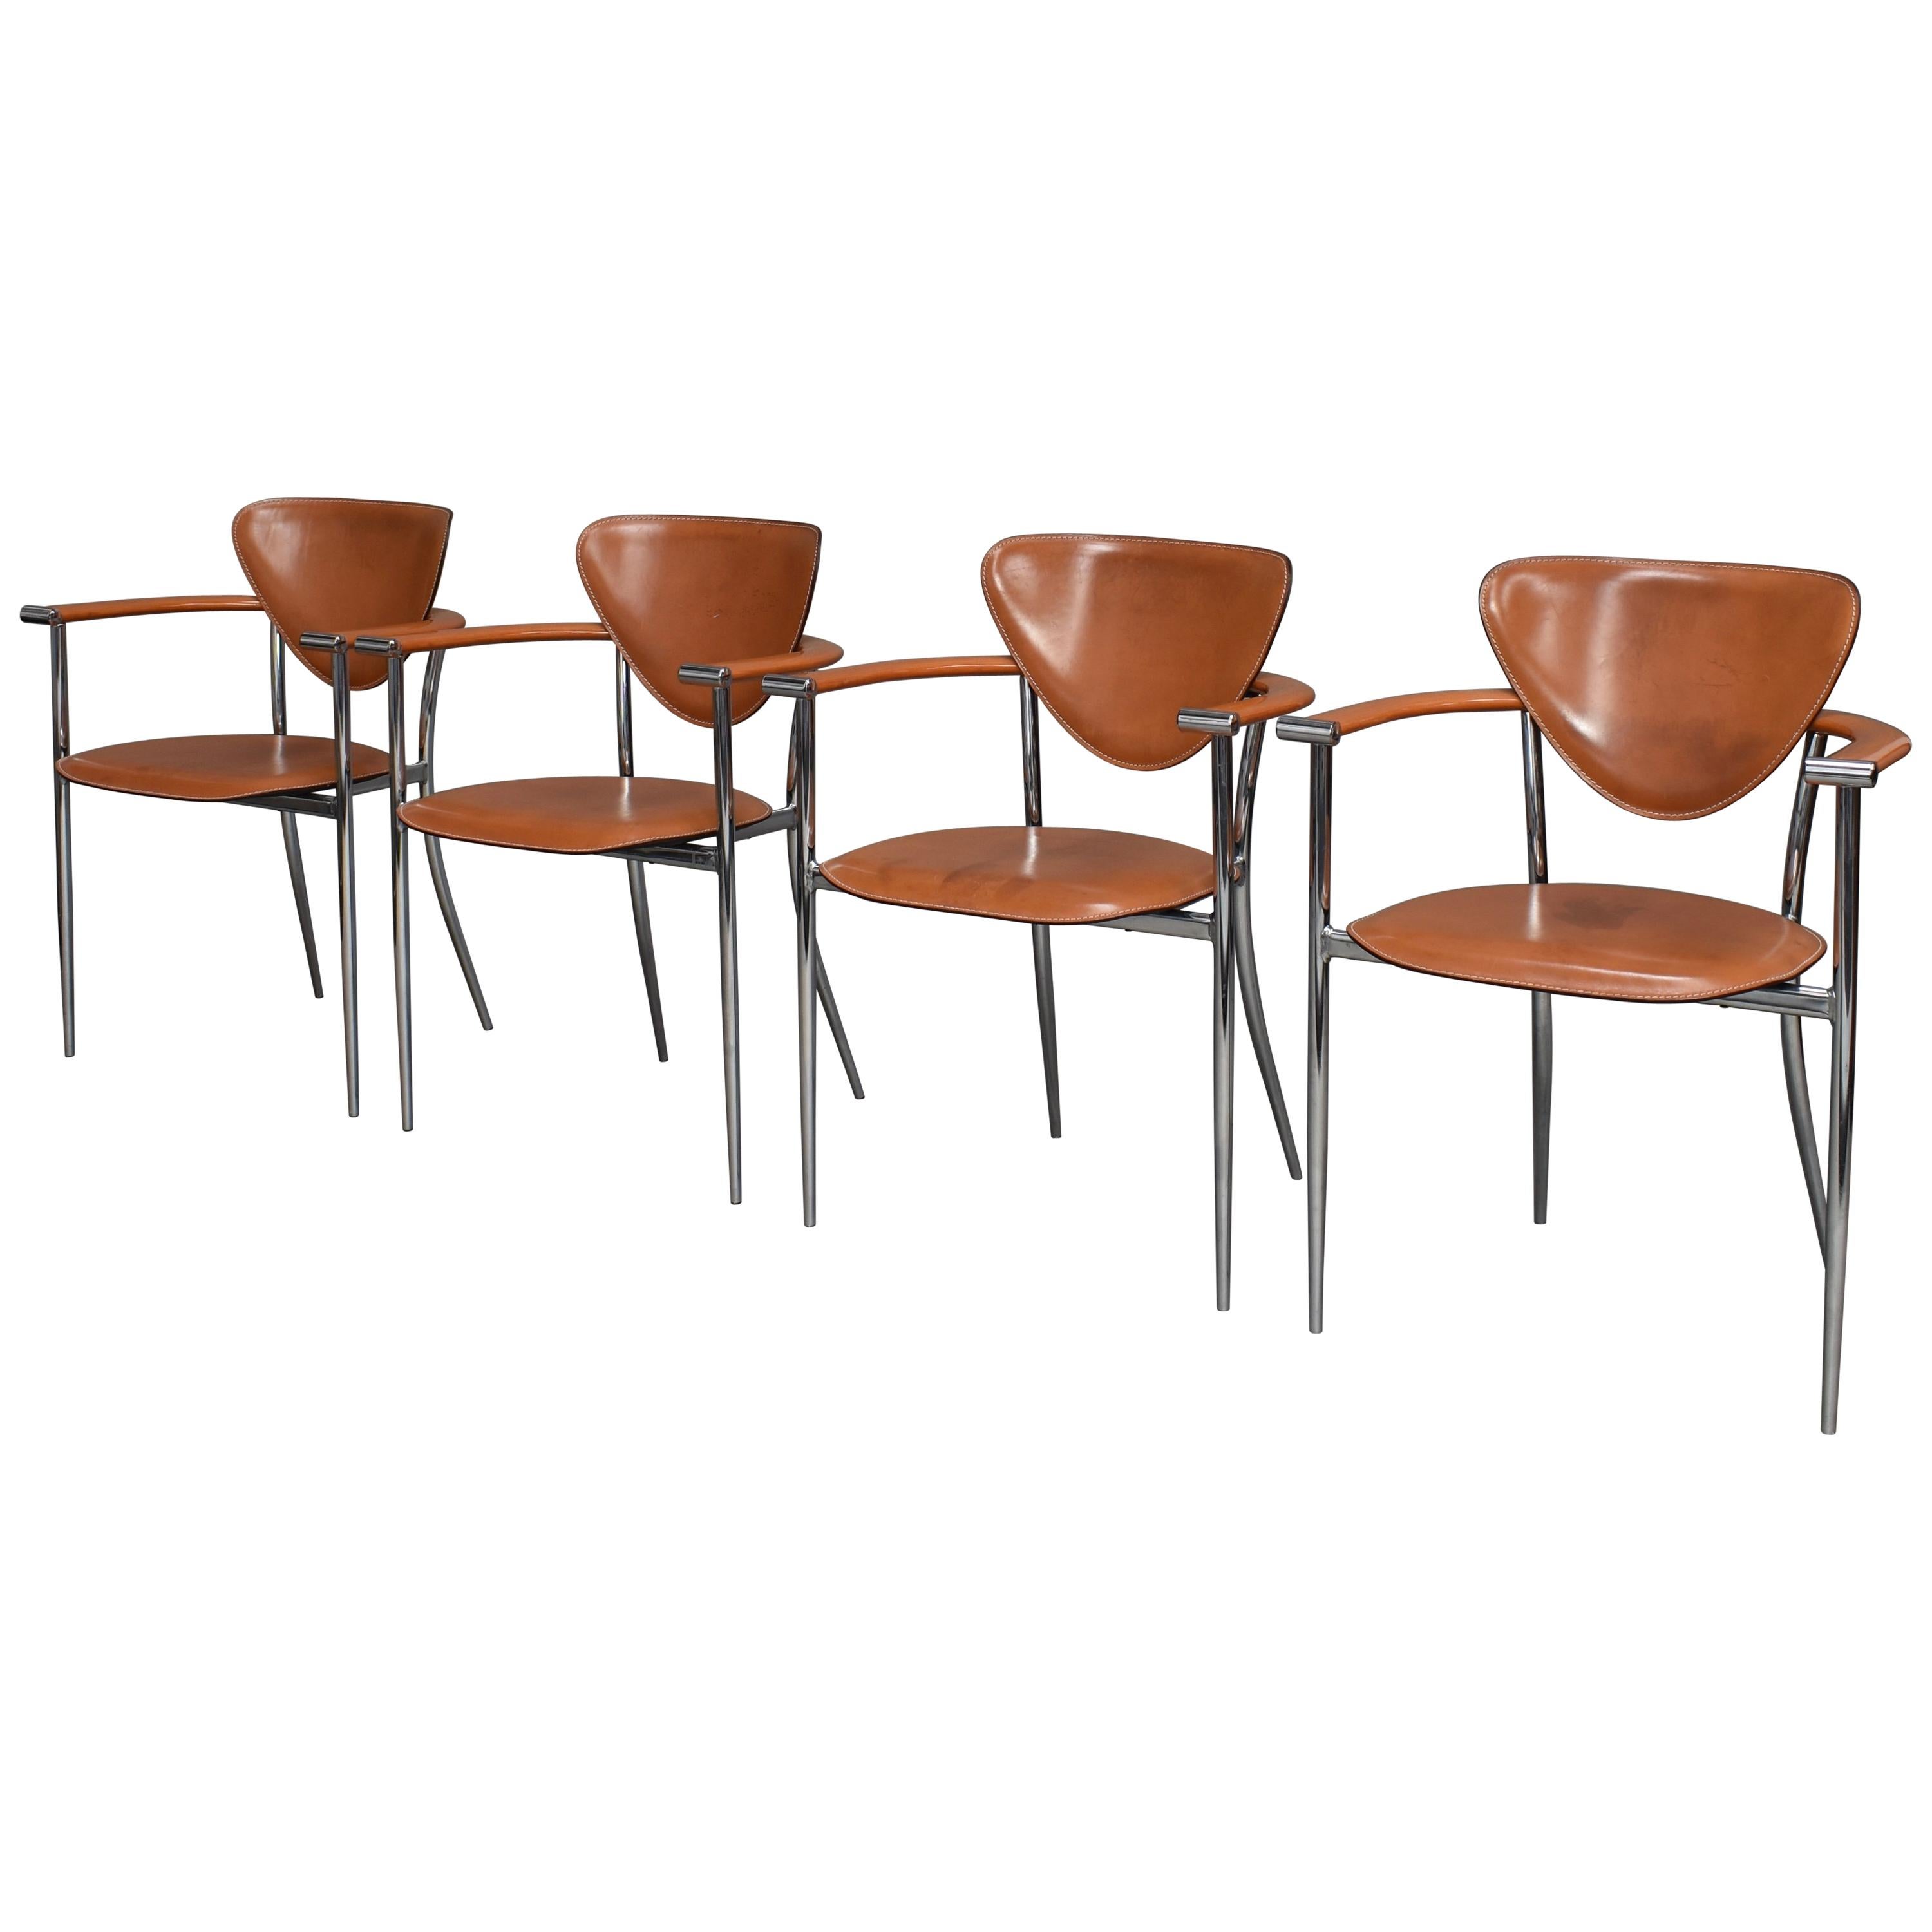 Arrben Italia Dining Chairs in Tan Leather